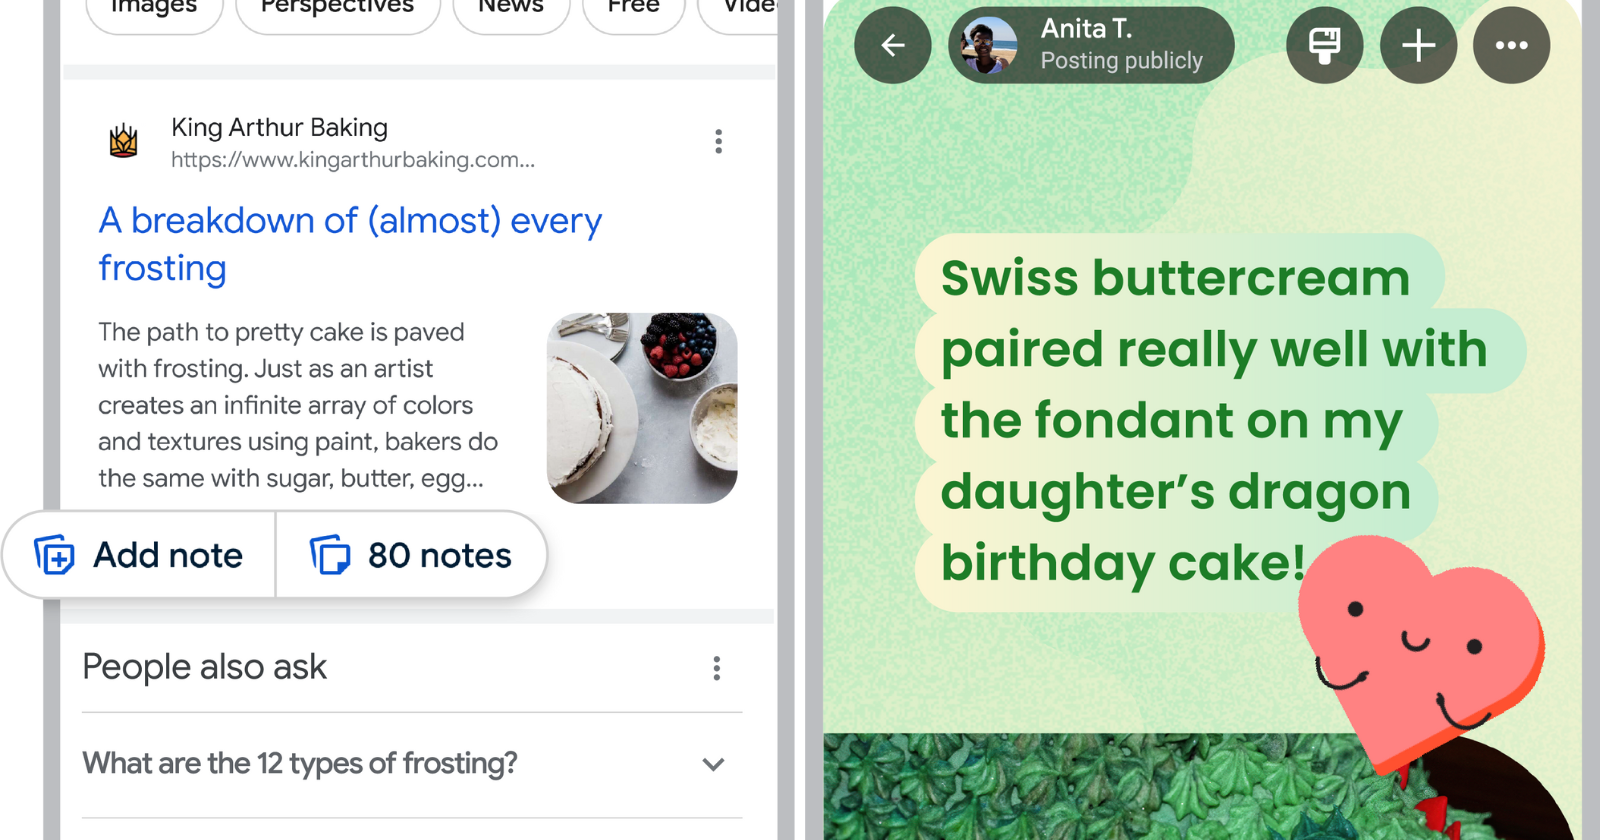 Google Launches "Notes" To Add User Comments In Search Results